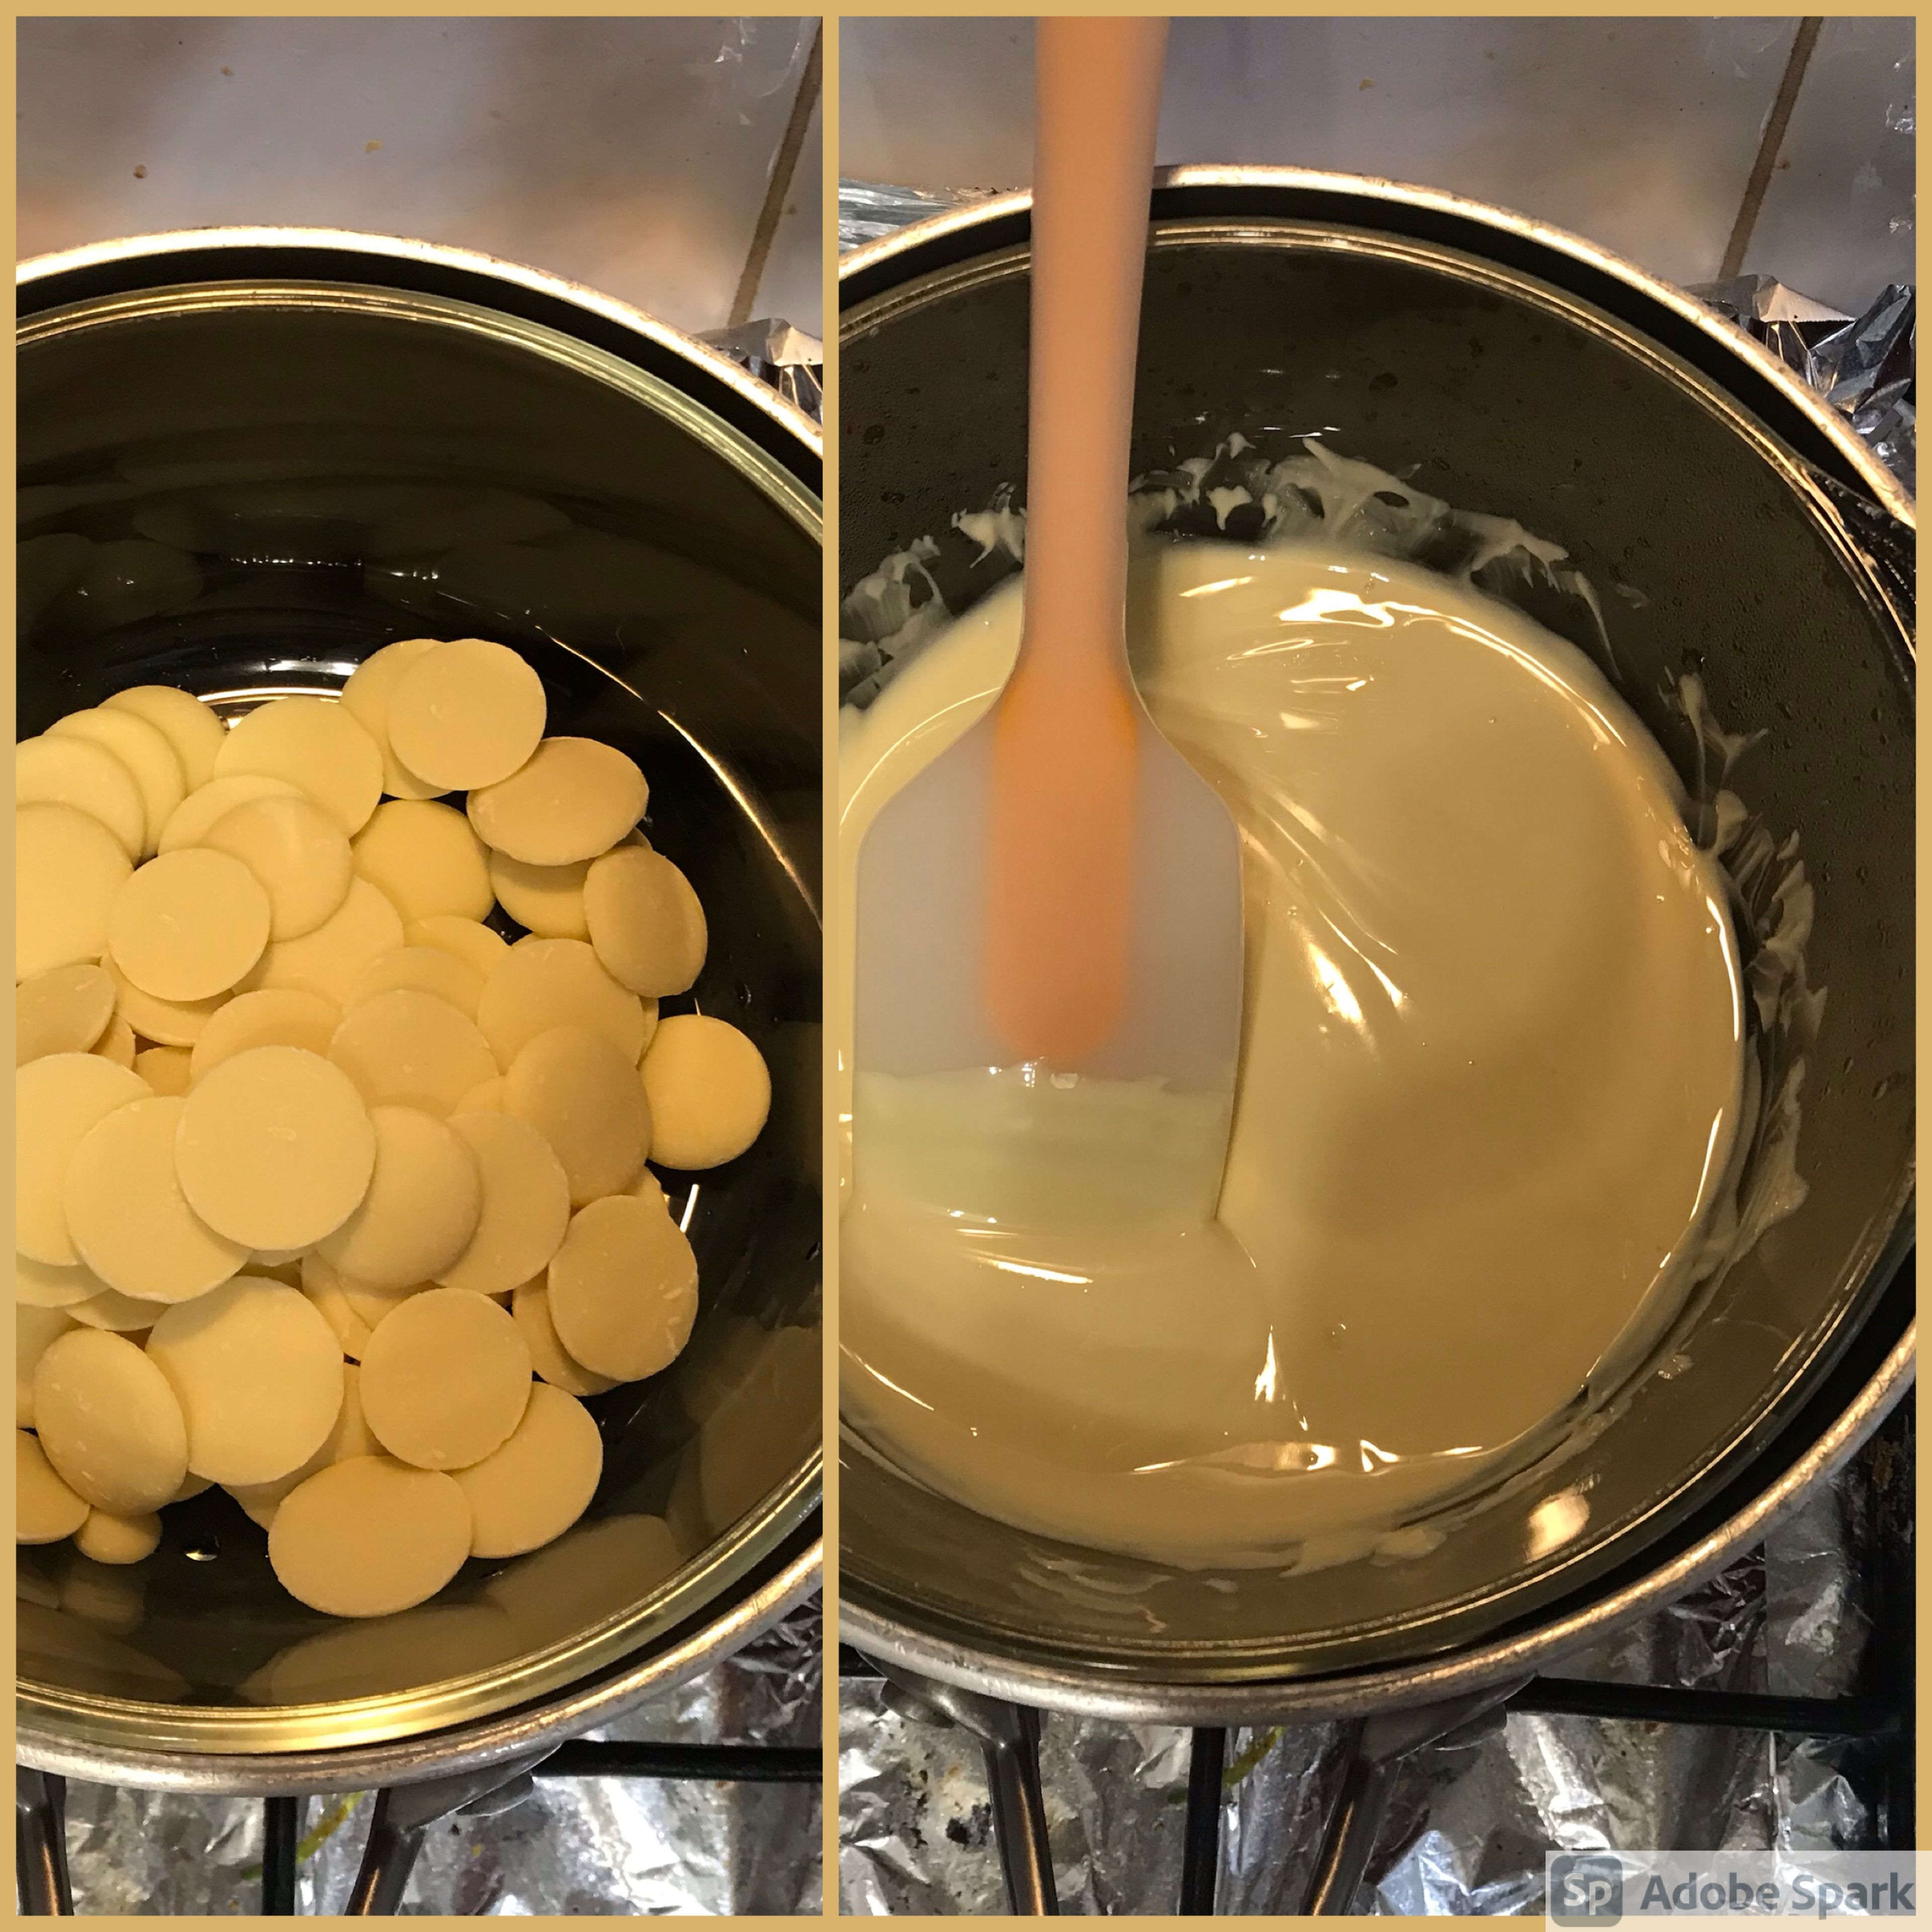 You can leave the cakes to chill for a day before assembling and frosting. To make the white chocolate buttercream, melt white chocolate. Make sure it’s completely smooth! (I used a glass bowl set over a saucepan of simmering water, but you can melt it in the microwave too.)